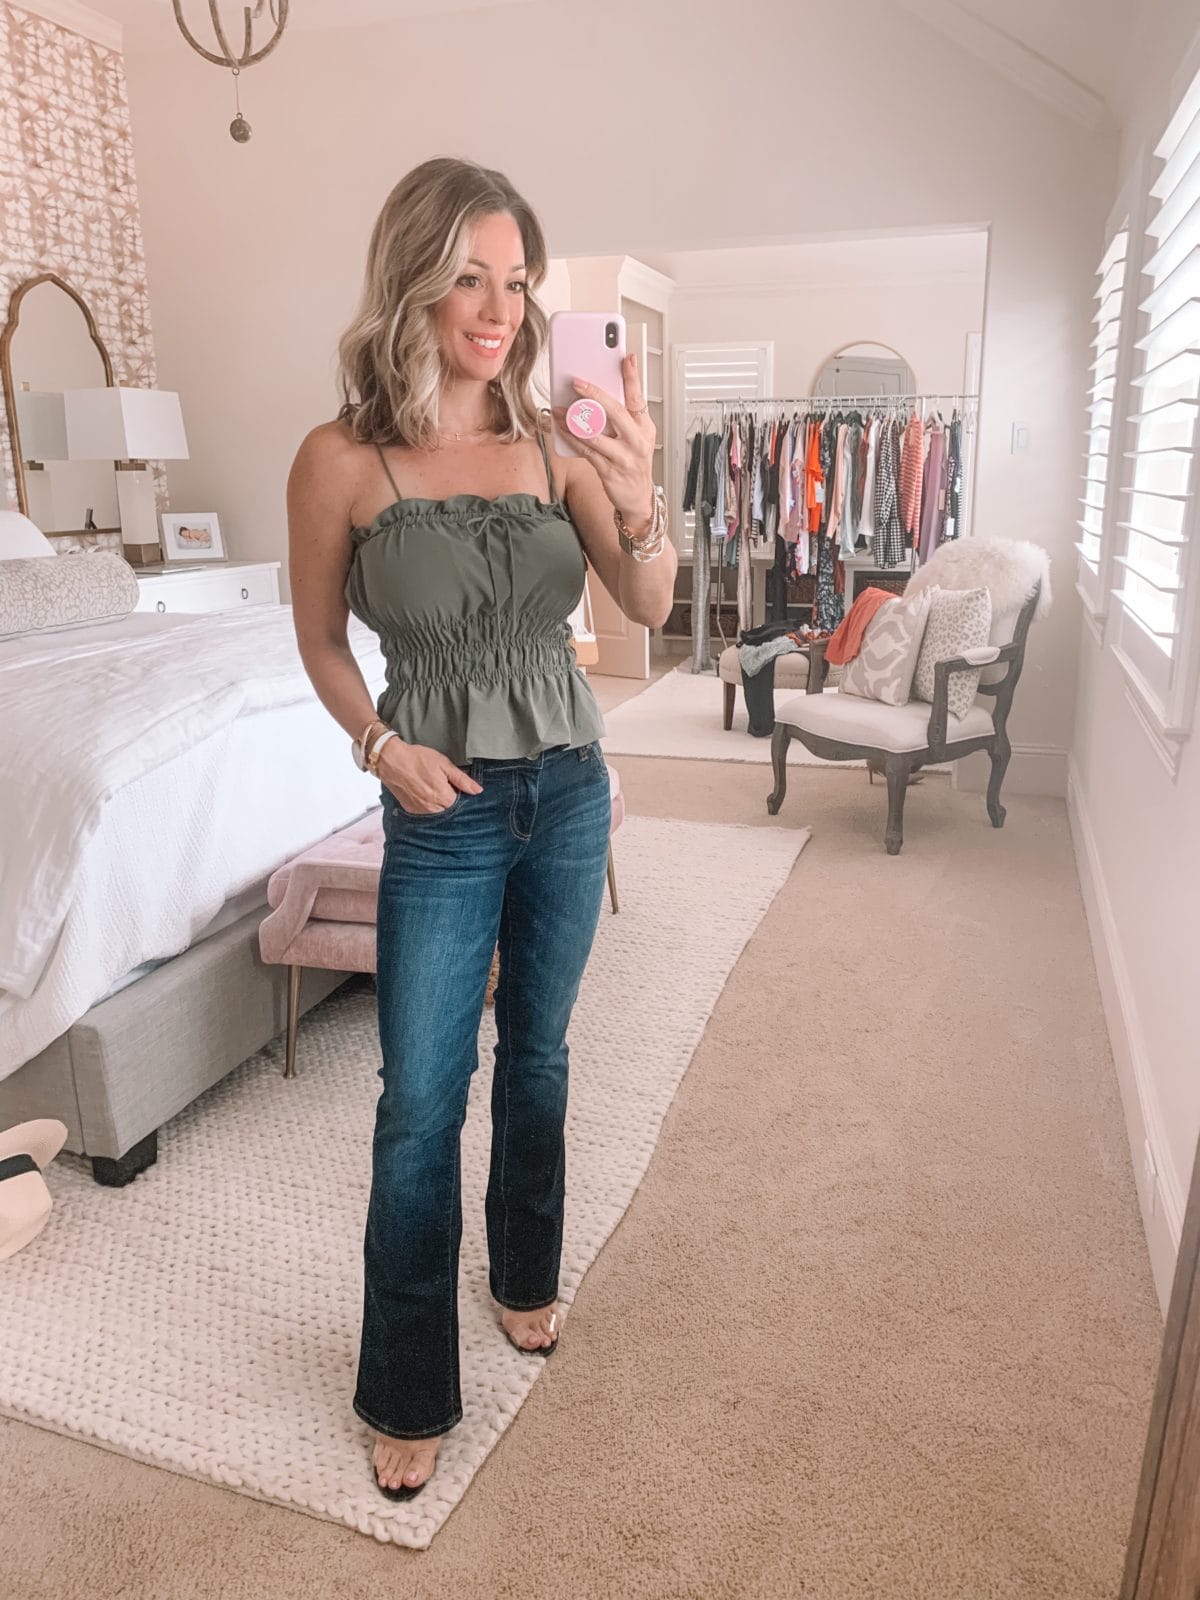 Dressing Room Nordstrom and LOFT, Shired Peplum Camisole, Flare Jeans, Clear Heels 